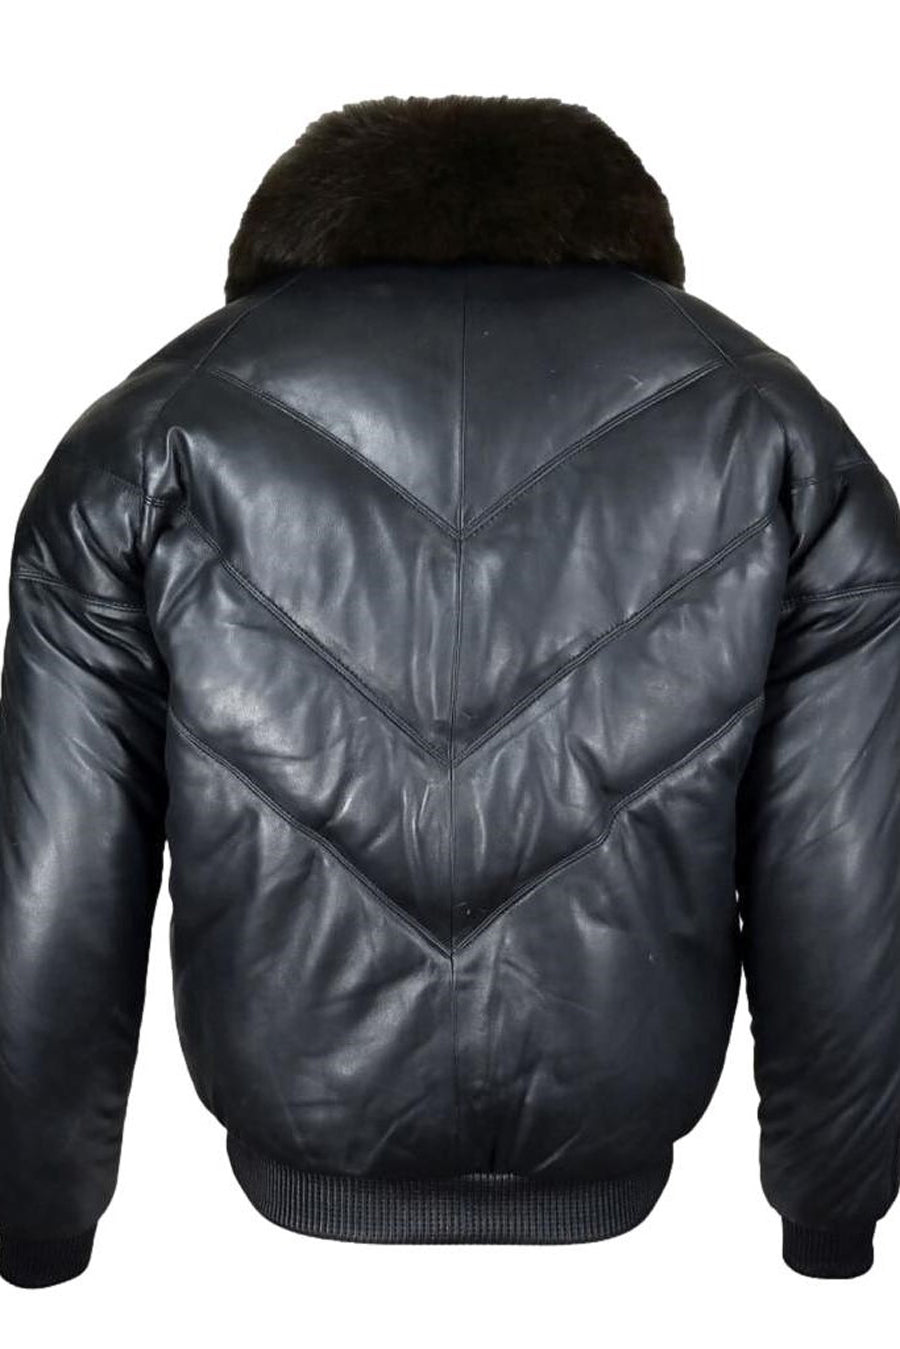 Picture of the back of our Mens Black Leather Bomber Jacket with Fur Collar.